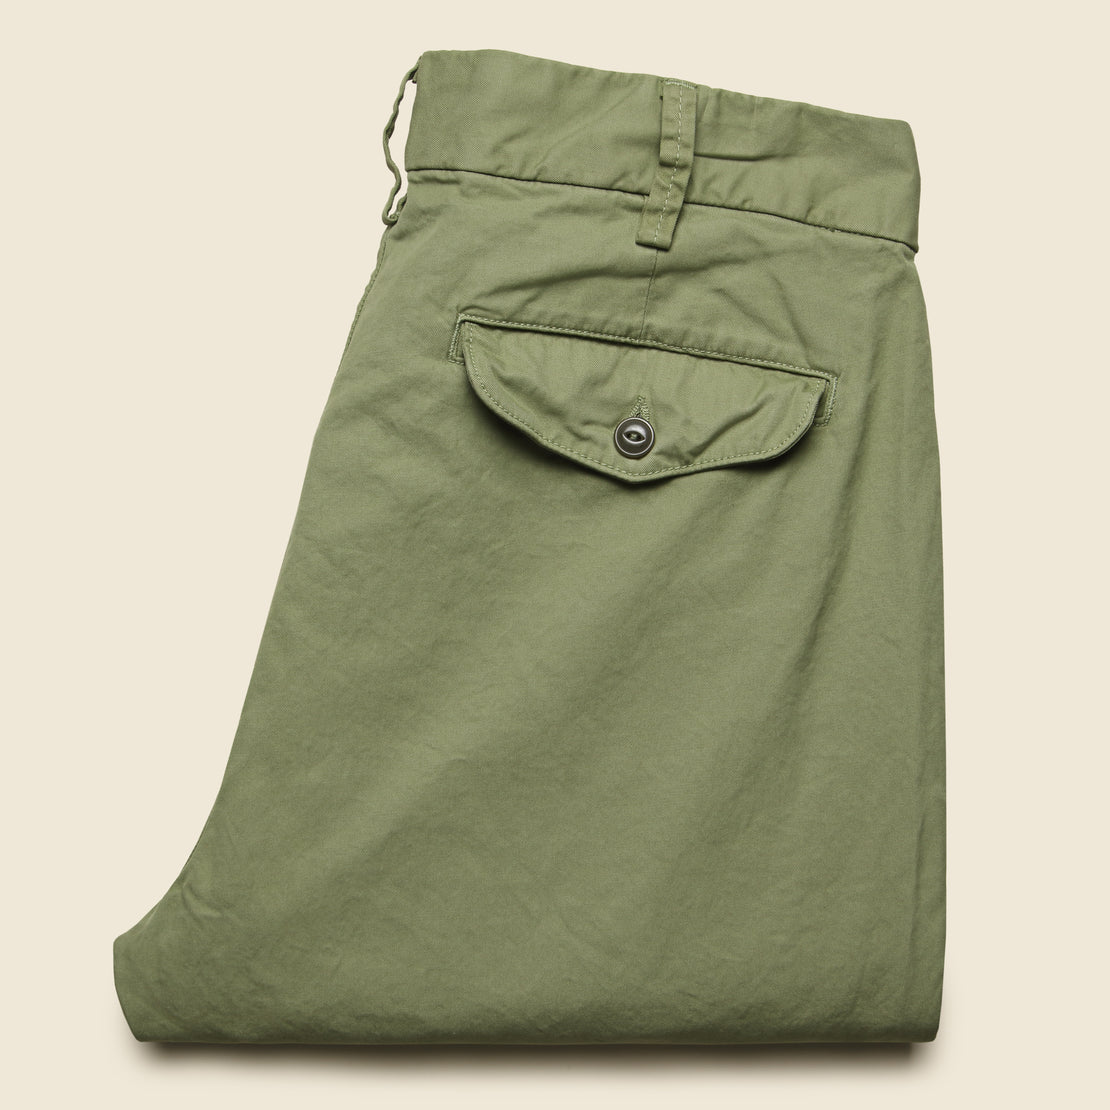 Light Twill Trouser - Fatigue - Save Khaki - STAG Provisions - Pants - Twill